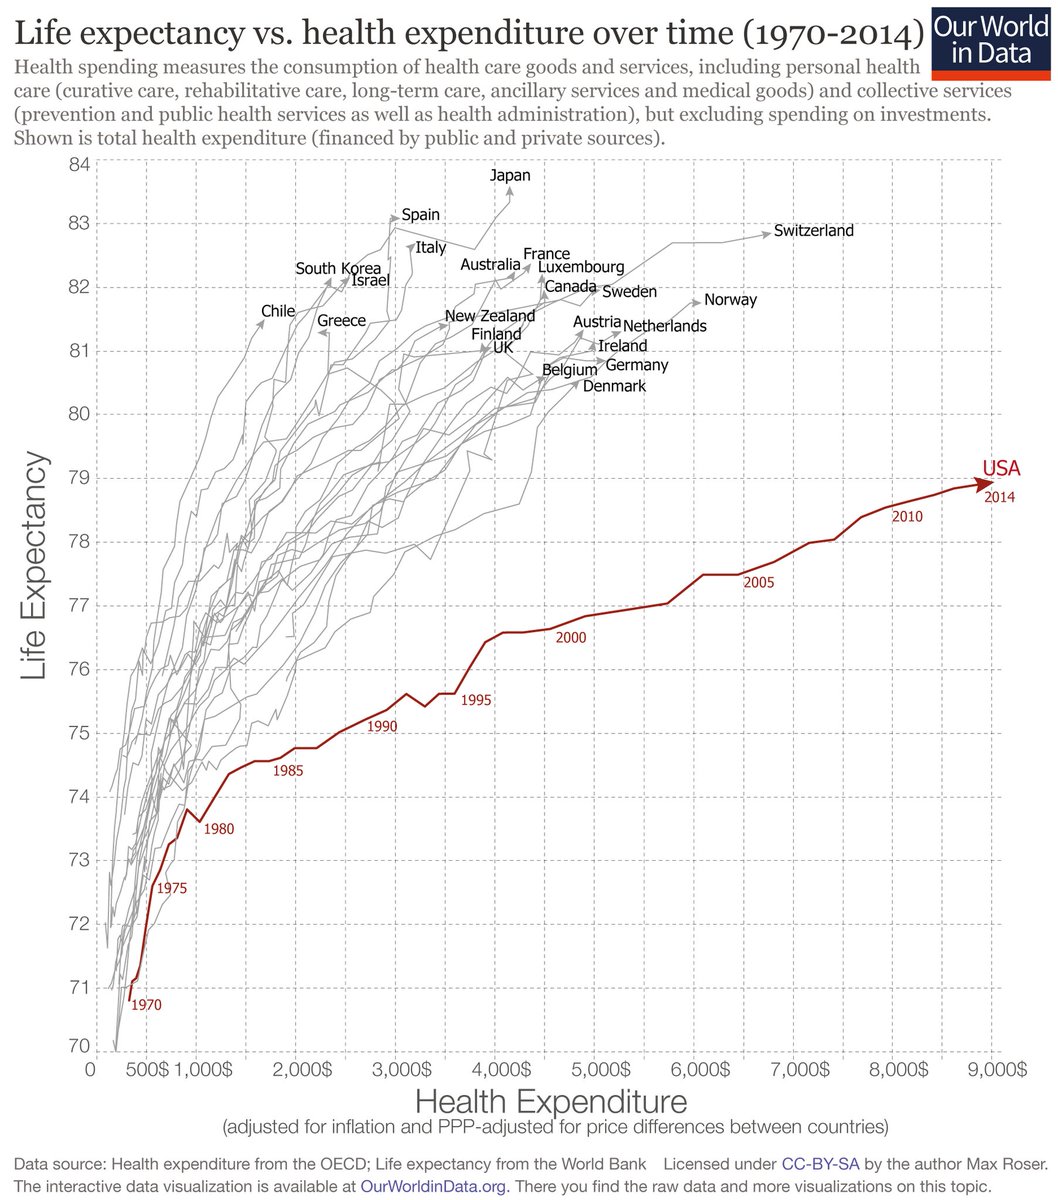 life-expectancy-vs-health-ependture-for-select-countries